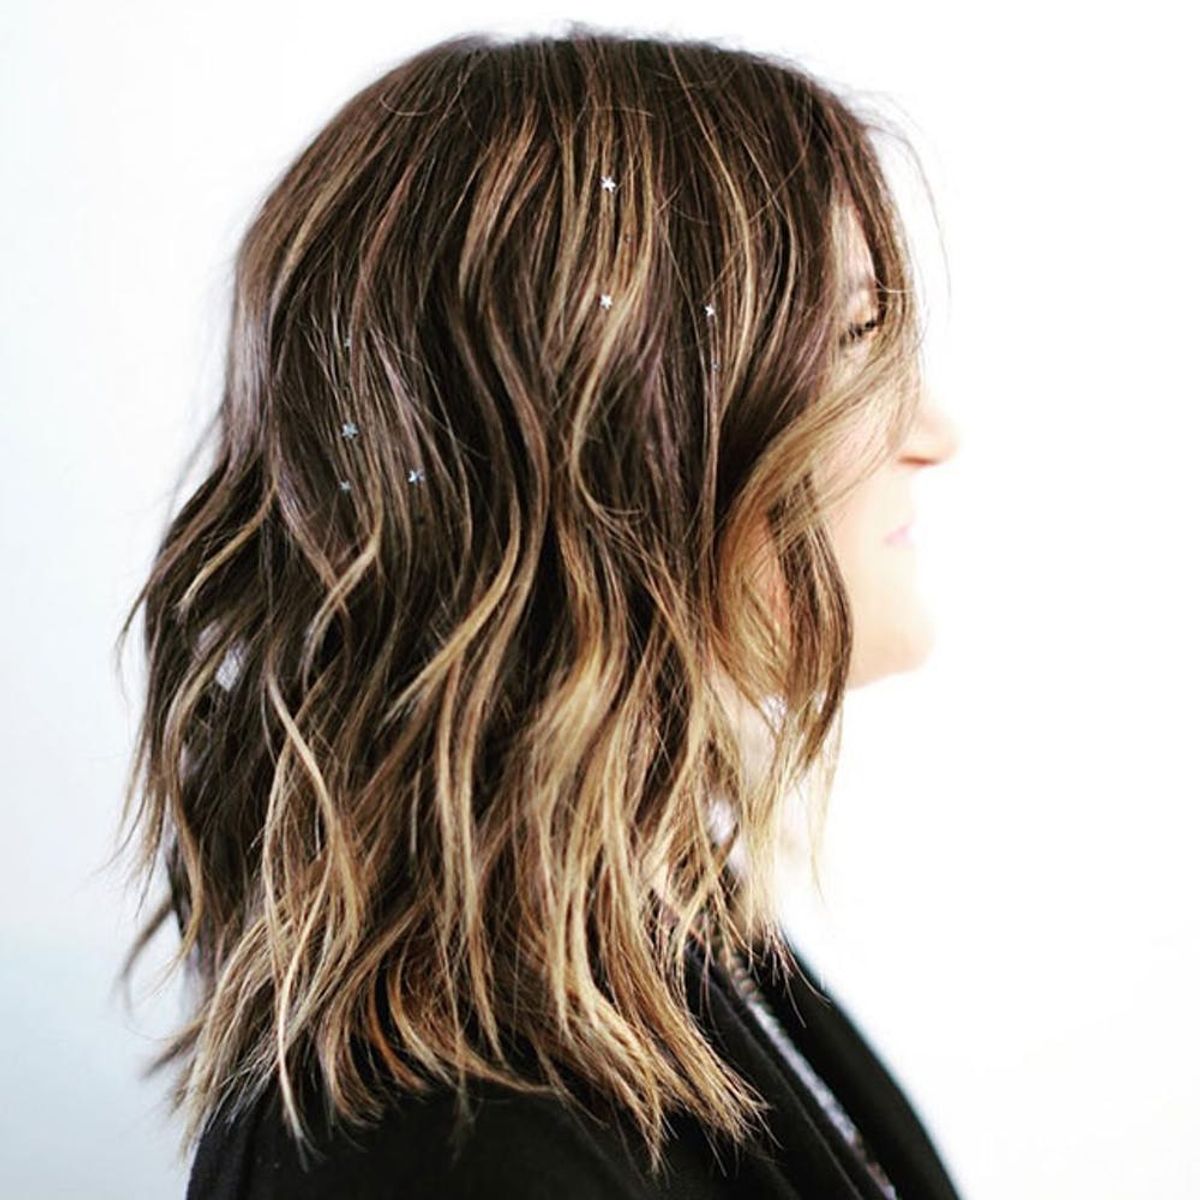 Balayage is Instagram’s Favorite Fall Hair Color Trend